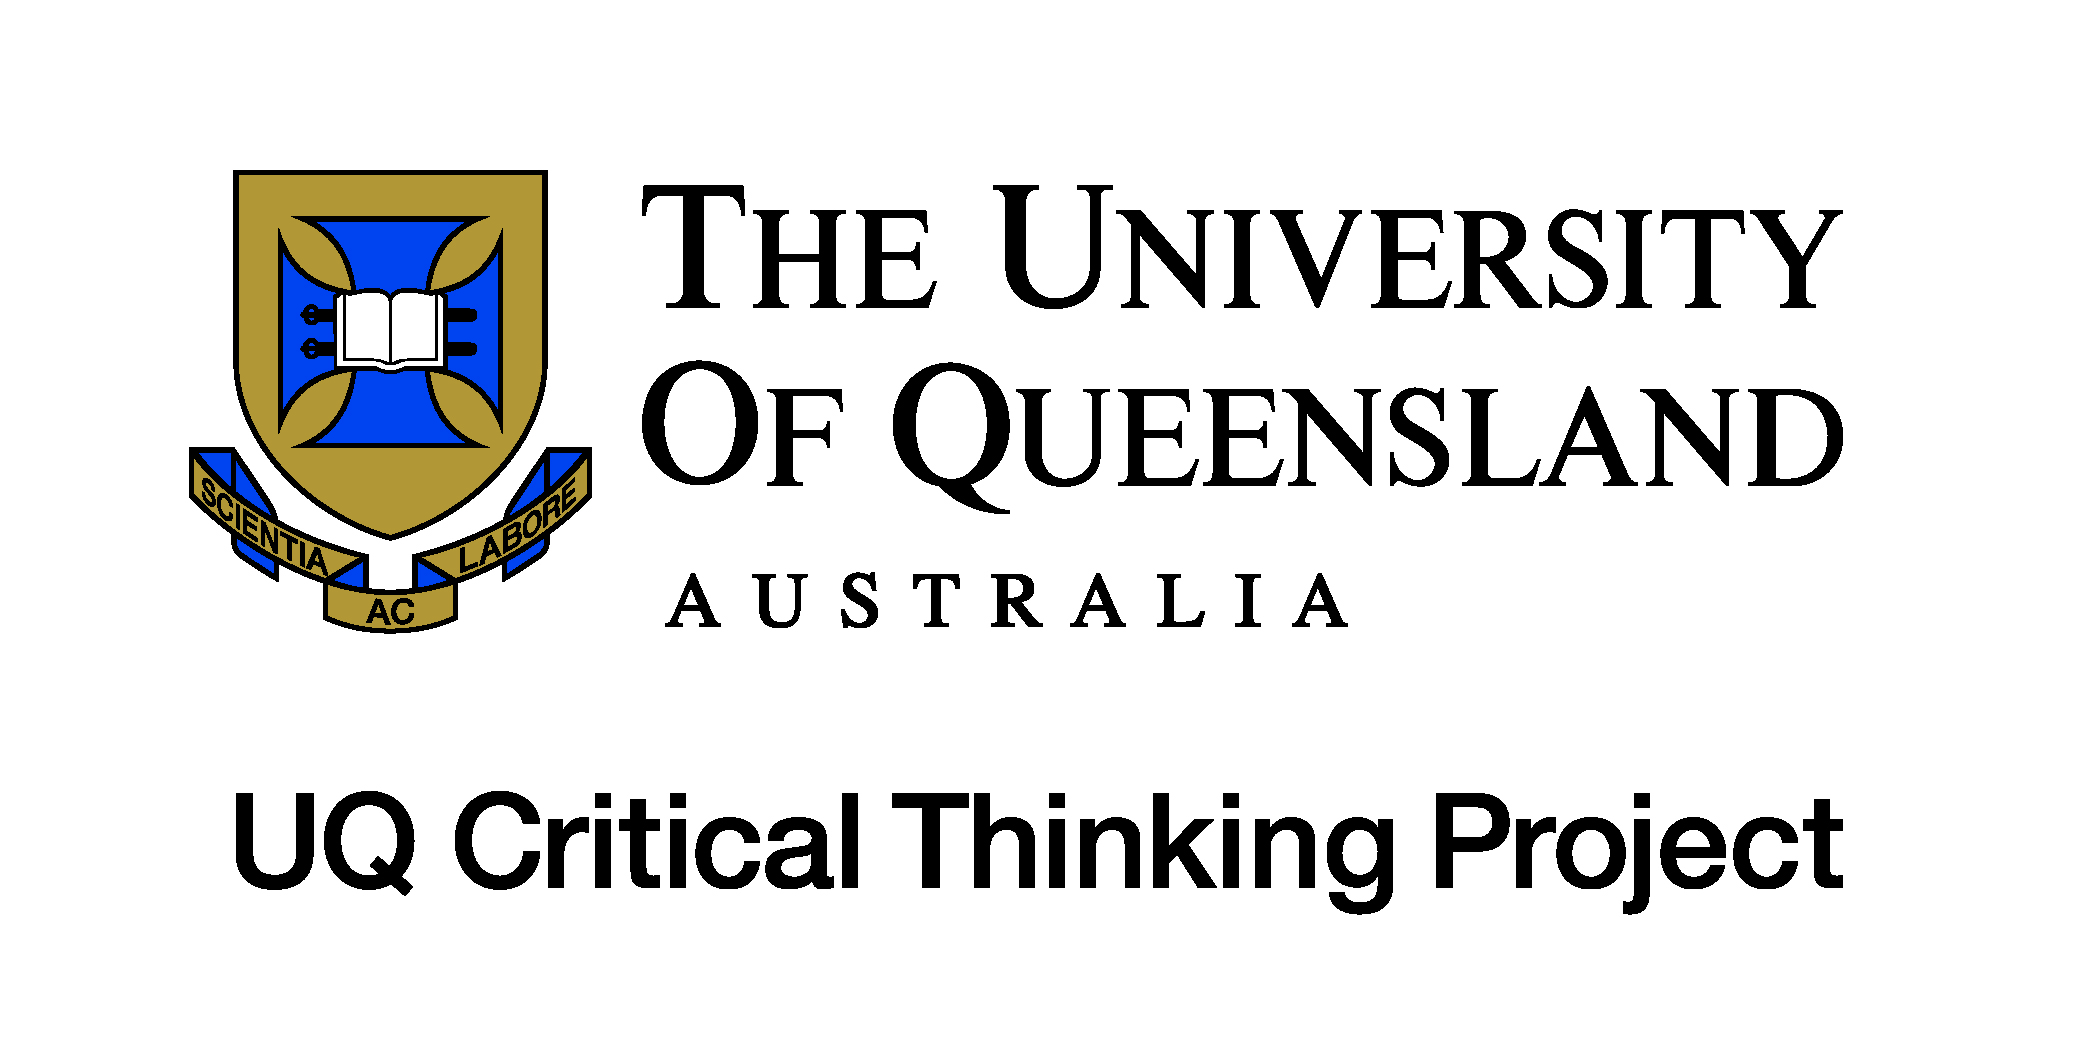 philosophy and critical thinking university of queensland